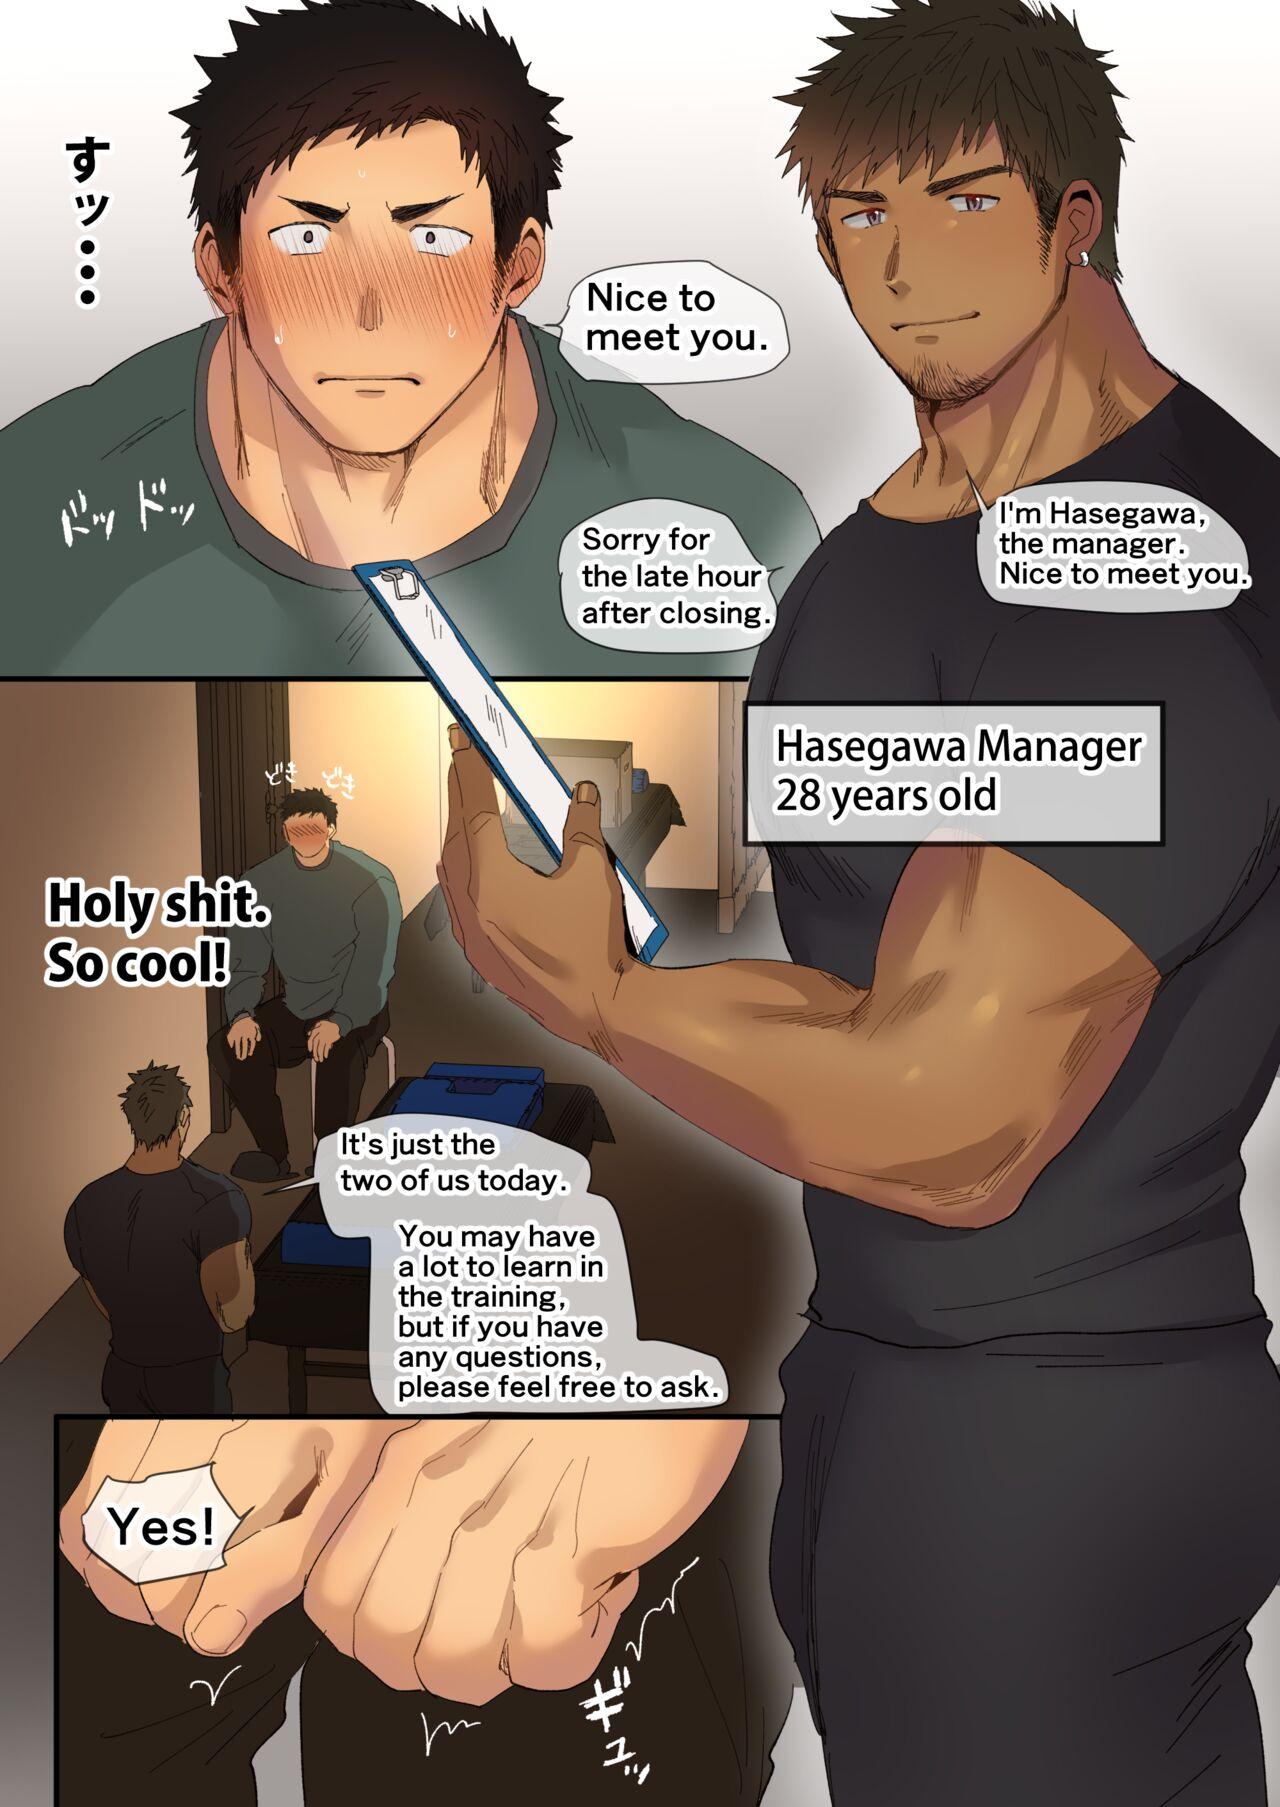 A manga about an athletic college student who receives sexually explicit massage training from an older manager 1